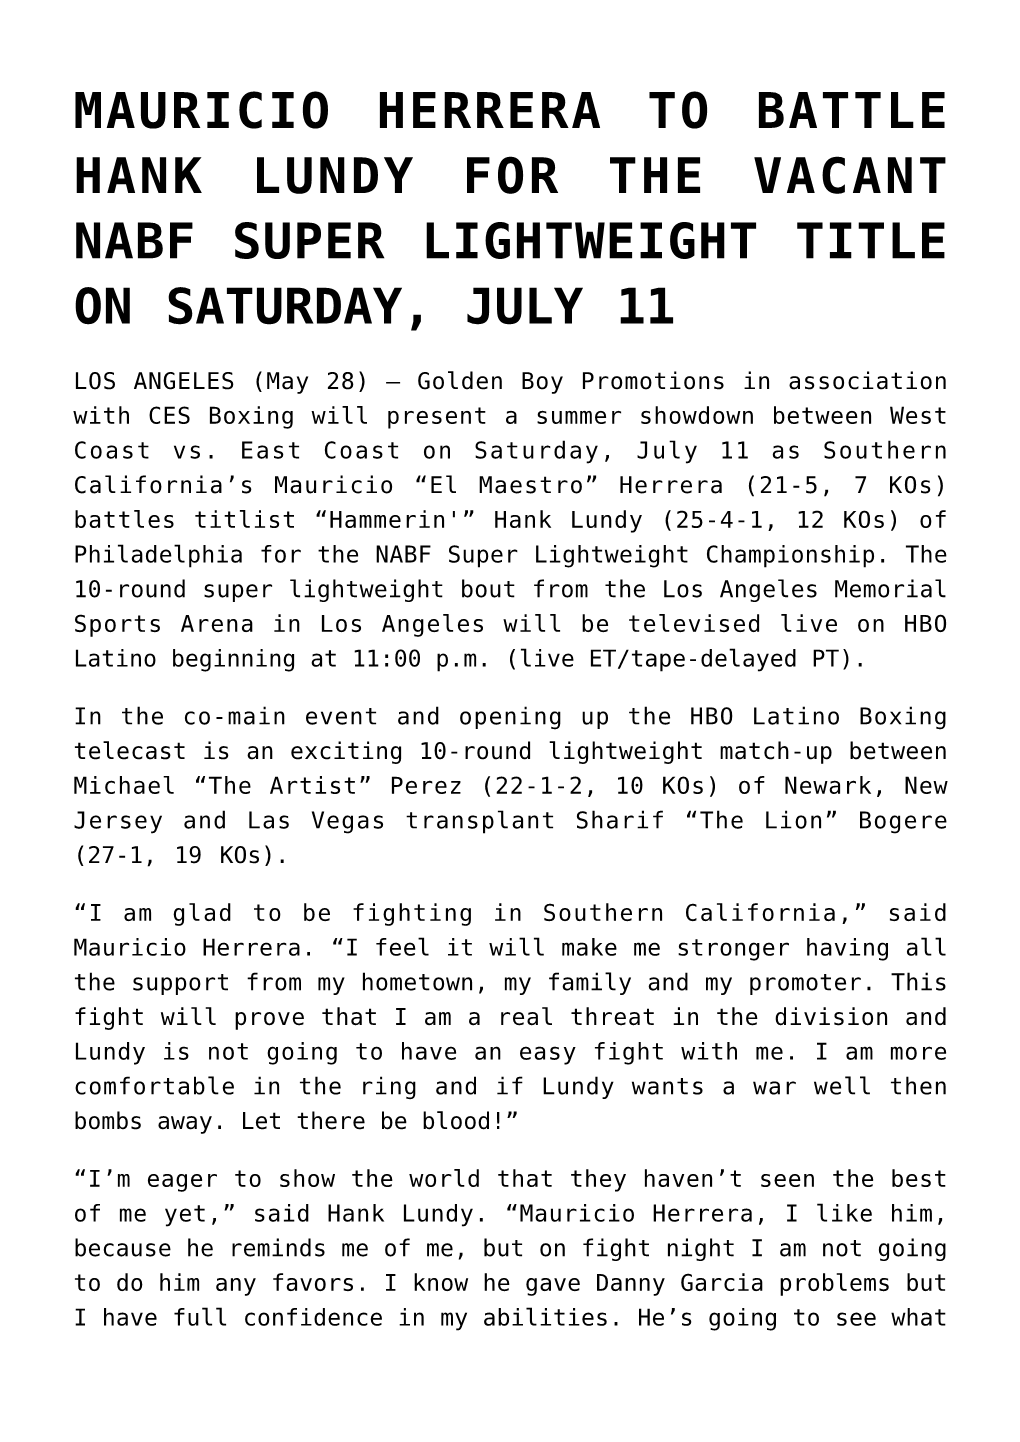 Mauricio Herrera to Battle Hank Lundy for the Vacant Nabf Super Lightweight Title on Saturday, July 11